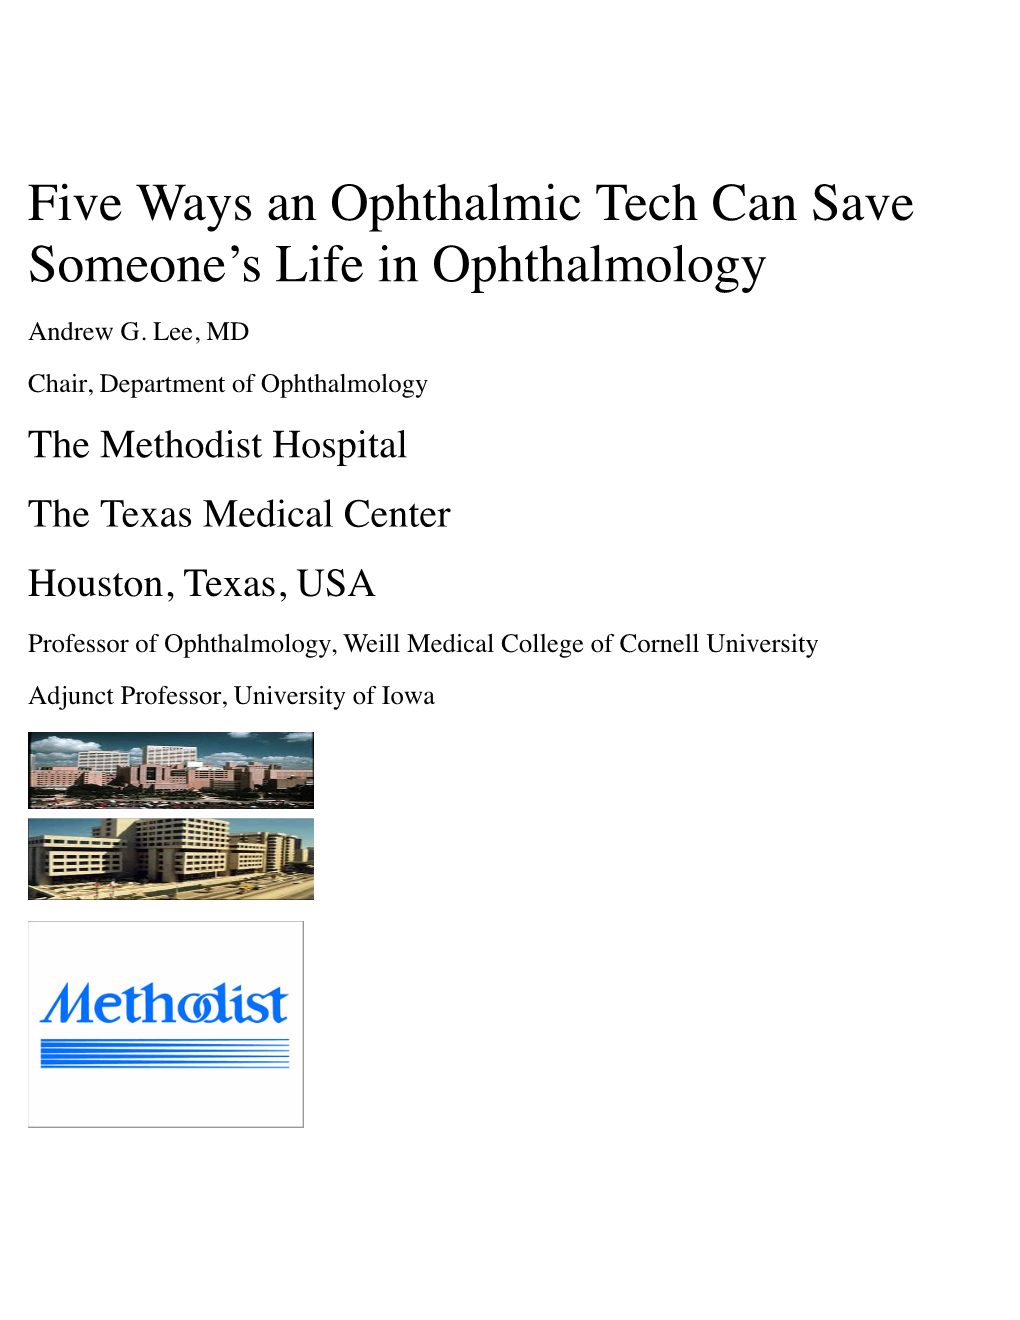 Five Ways an Ophthalmic Tech Can Save Someone's Life In